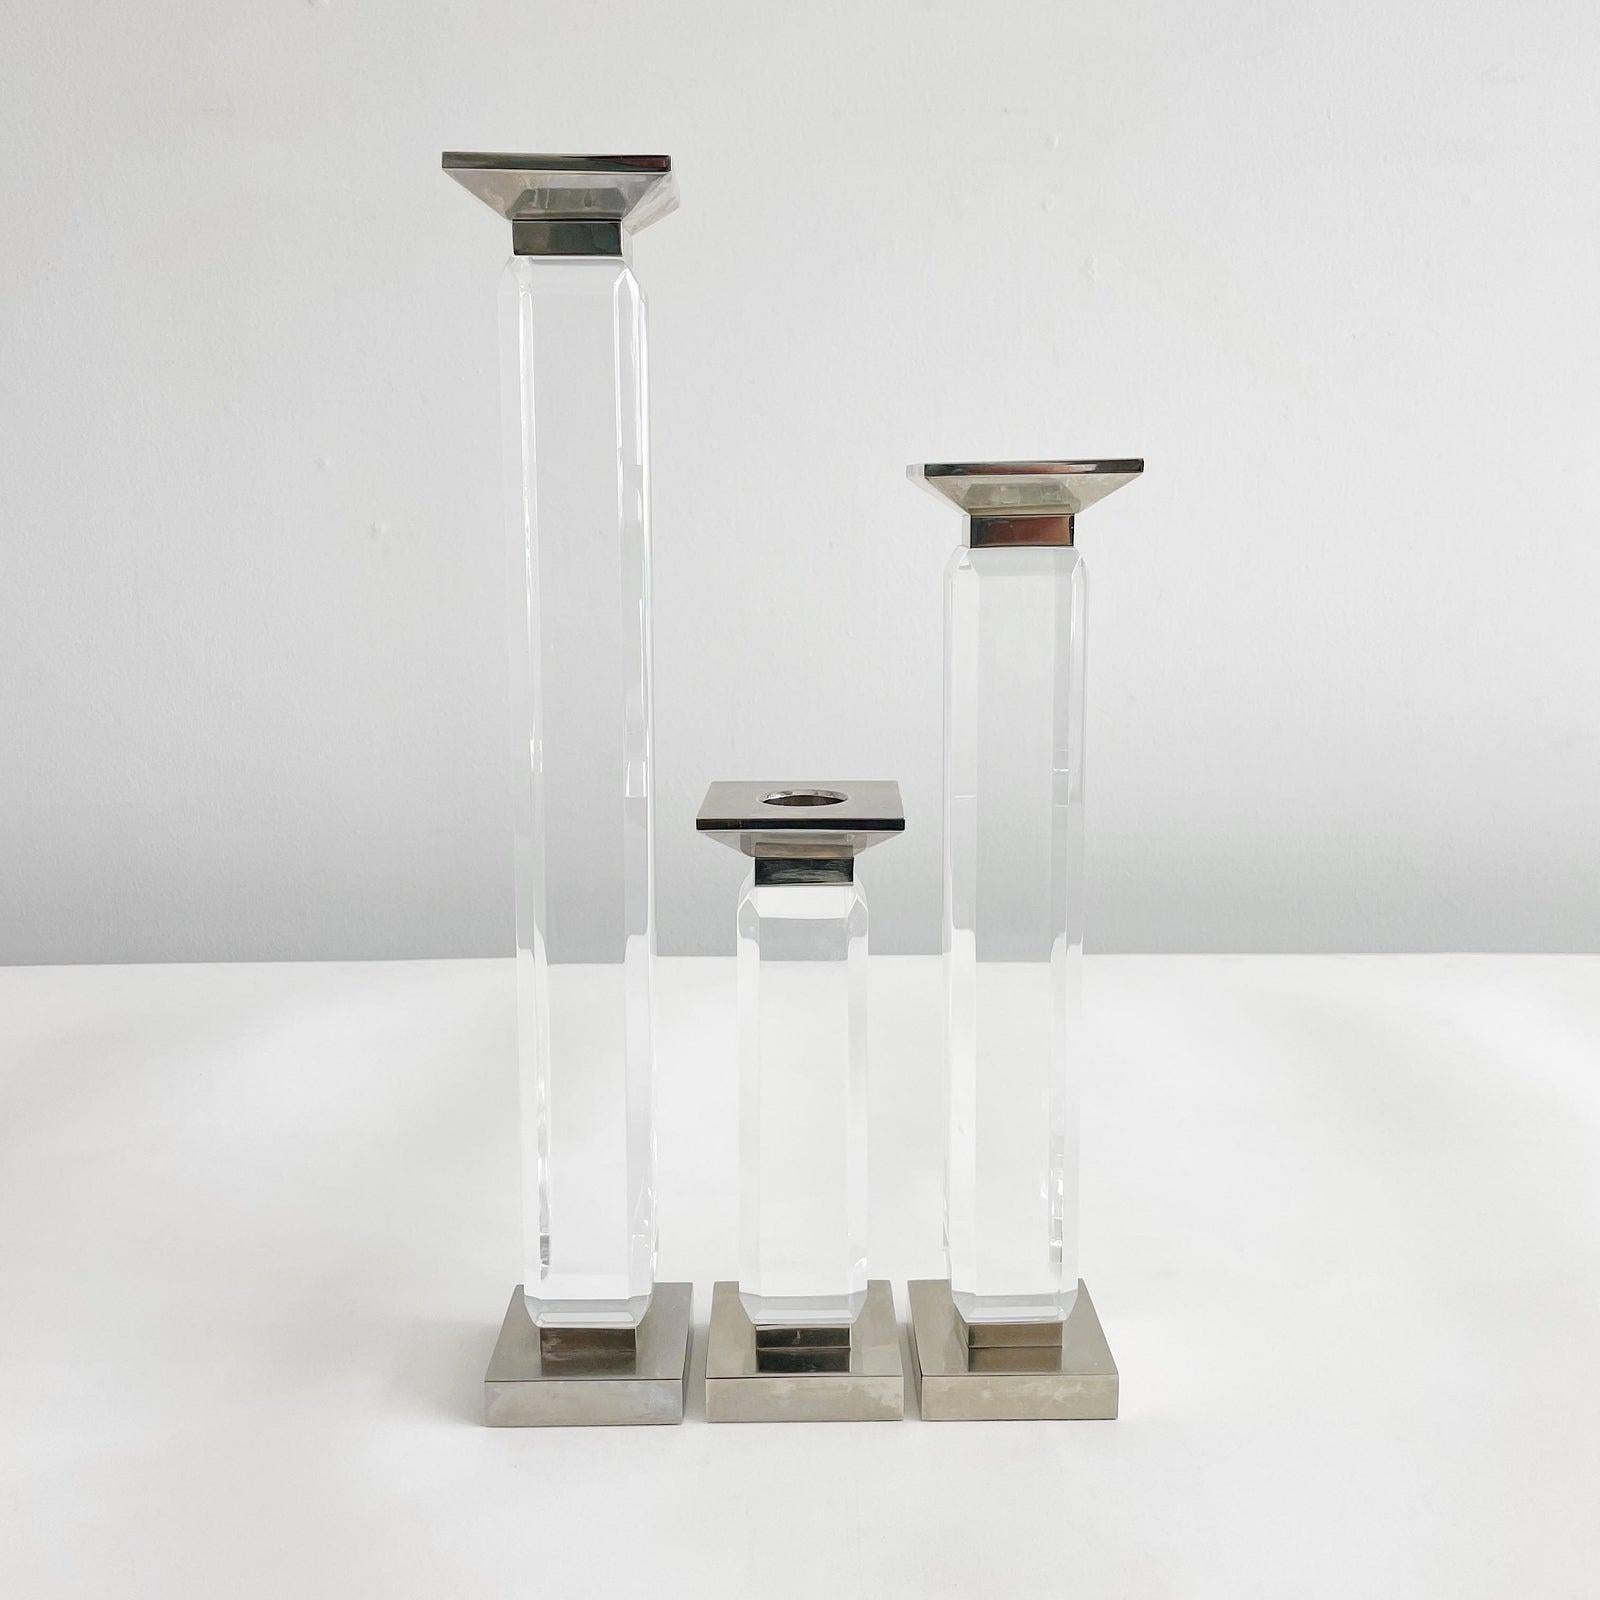 Polished chrome and lucite candle holders in graduating sizes by Charles Hollis Jones. Each base measures 3 inches square. Height of large candlestick is 18.25 inches, medium candlestick is 14.25 inches and small is 9.25 inches.